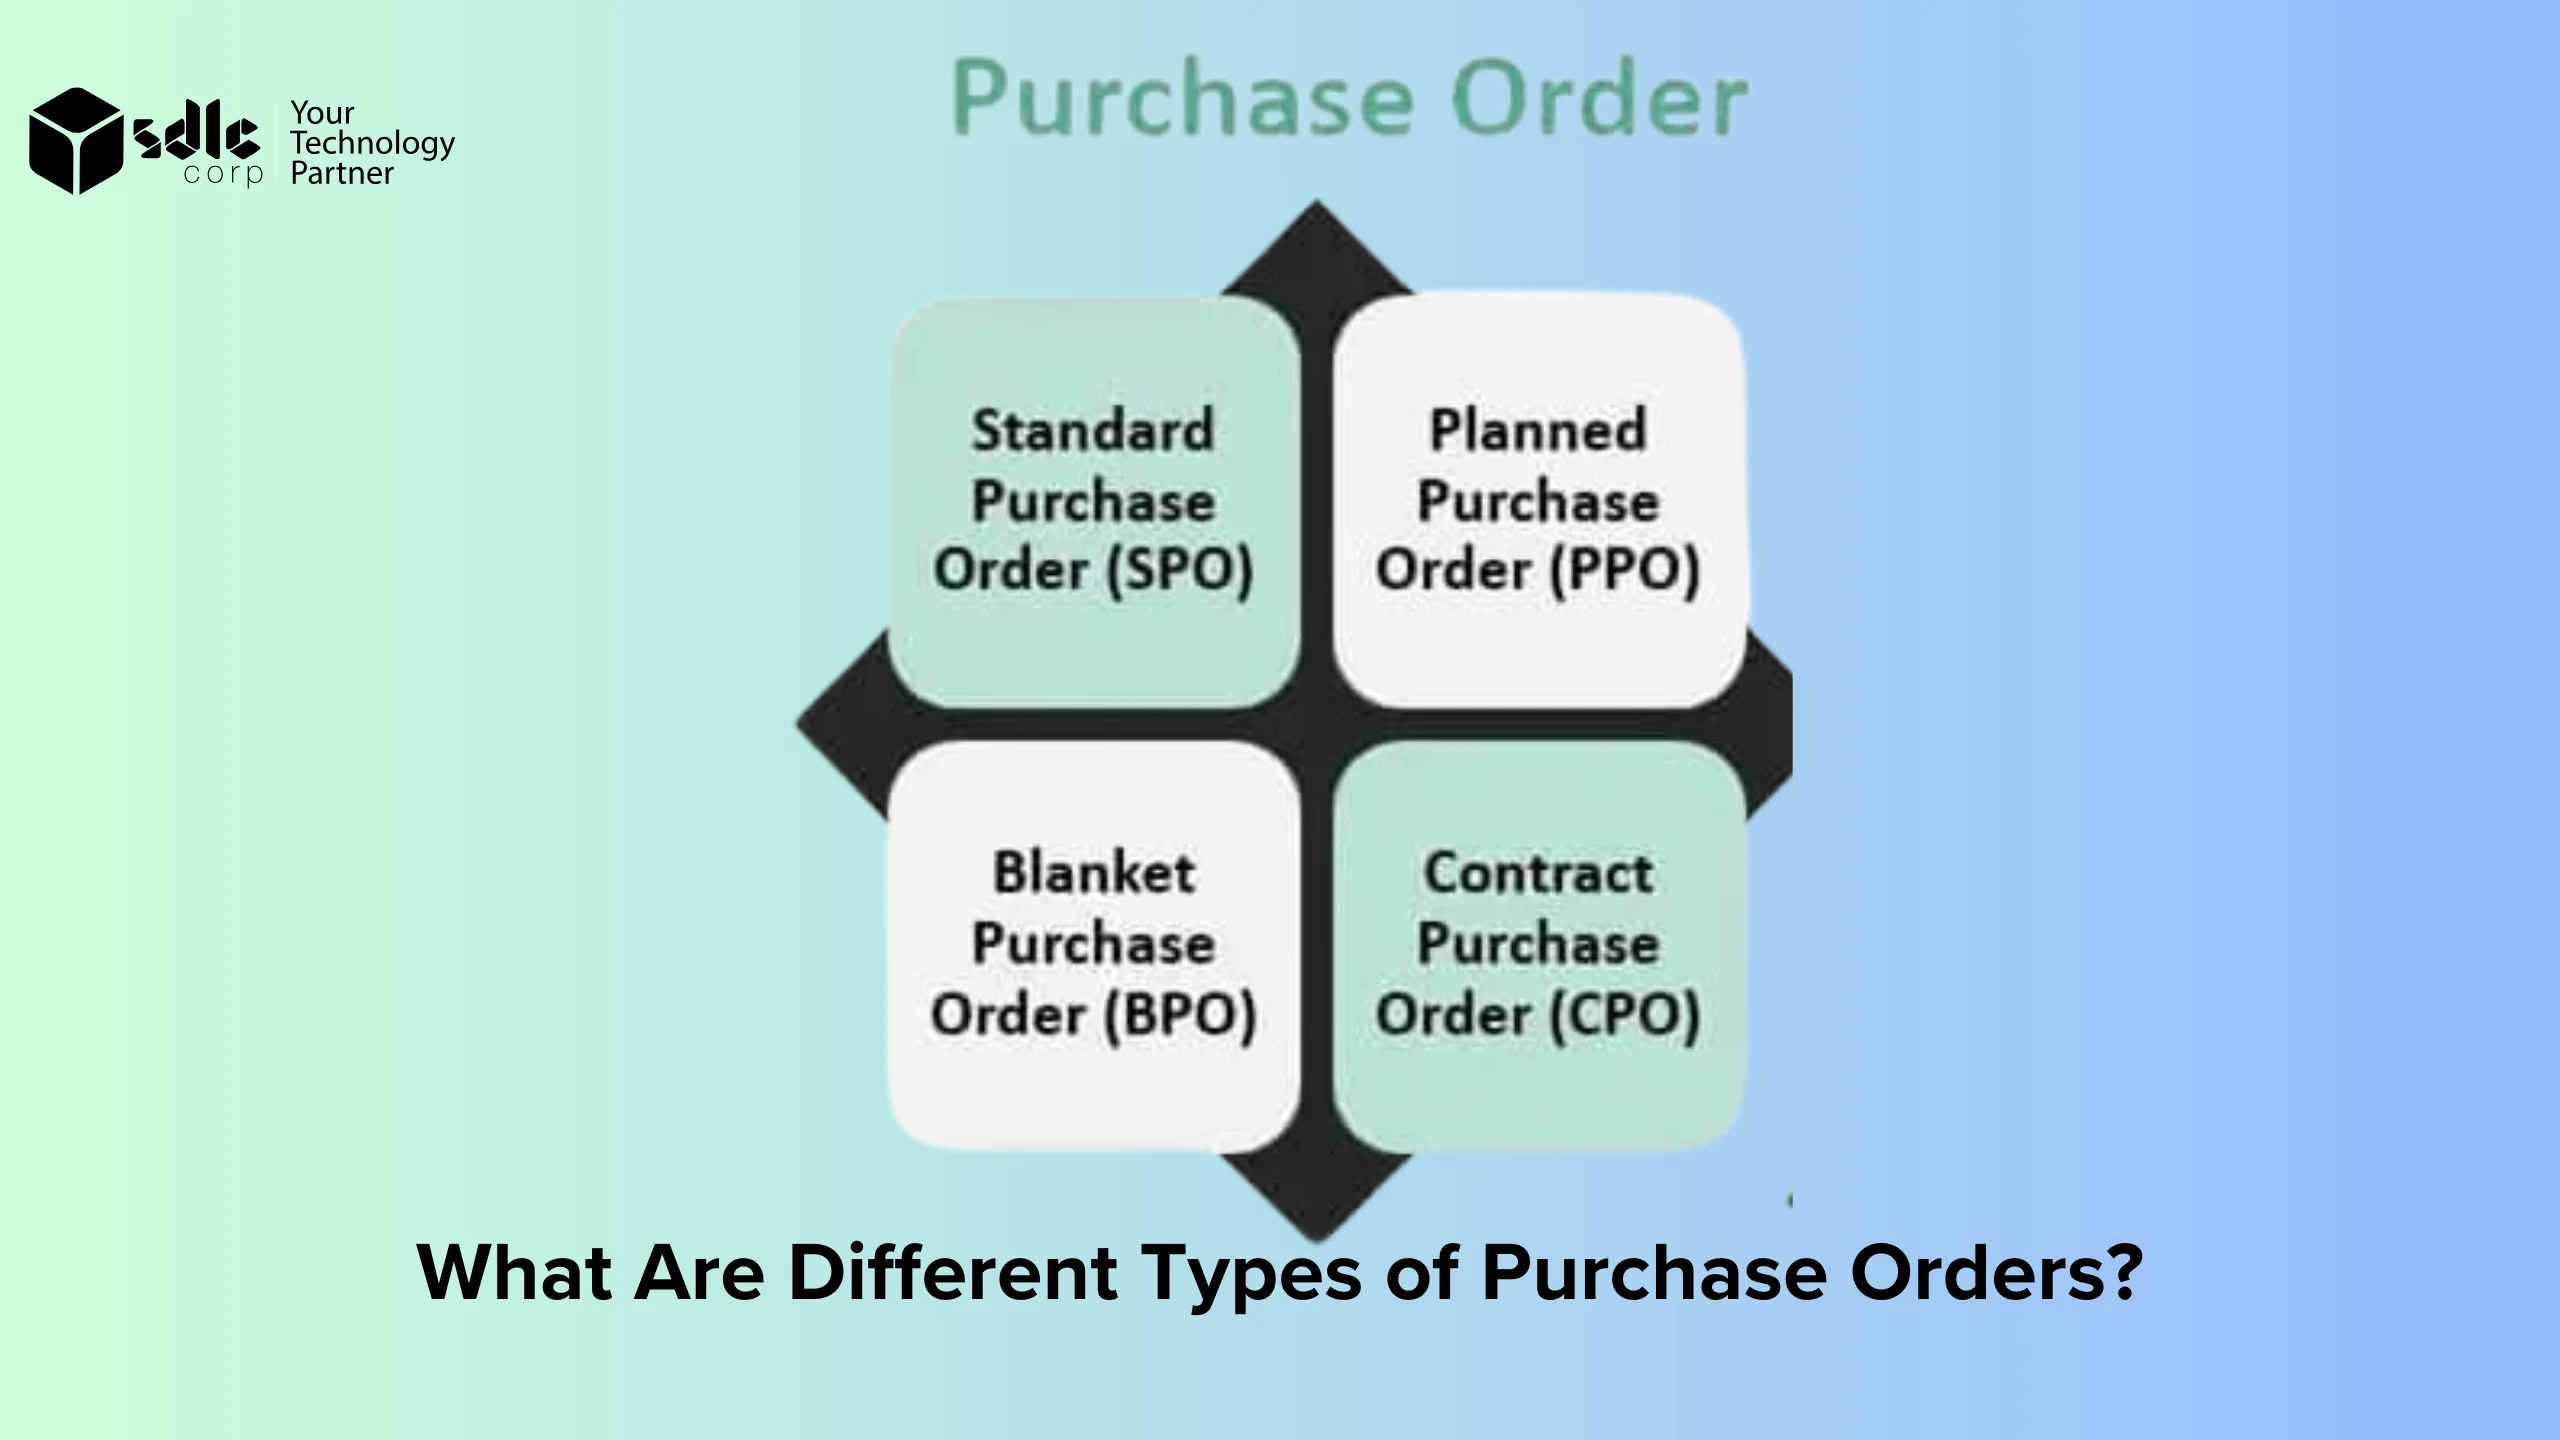 What Are Different Types of Purchase Orders